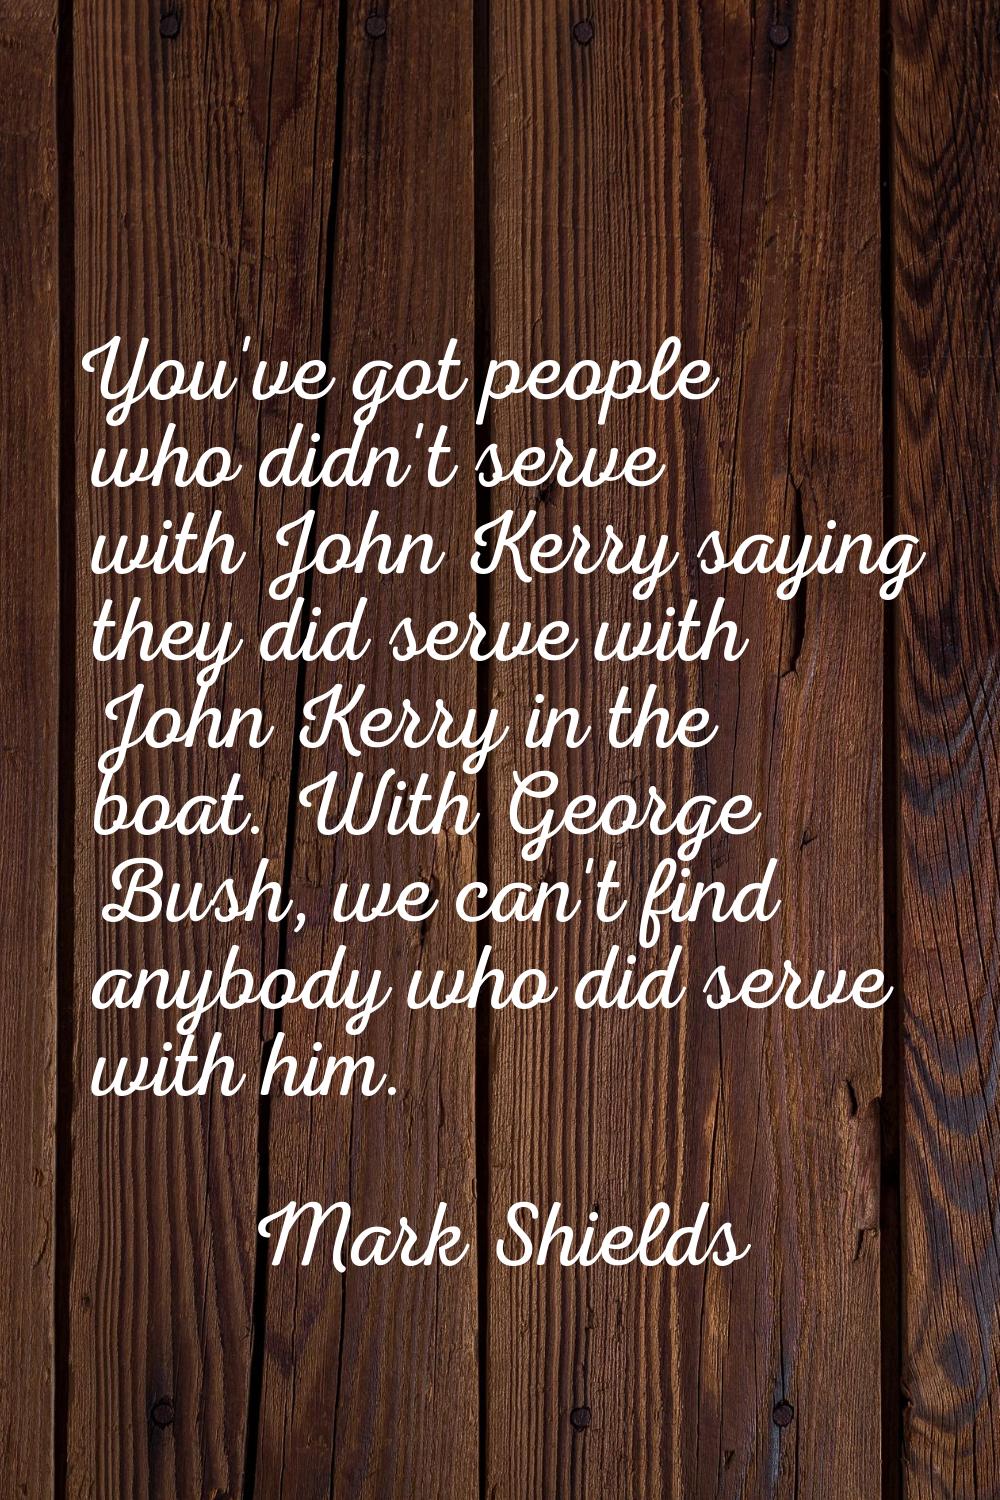 You've got people who didn't serve with John Kerry saying they did serve with John Kerry in the boa